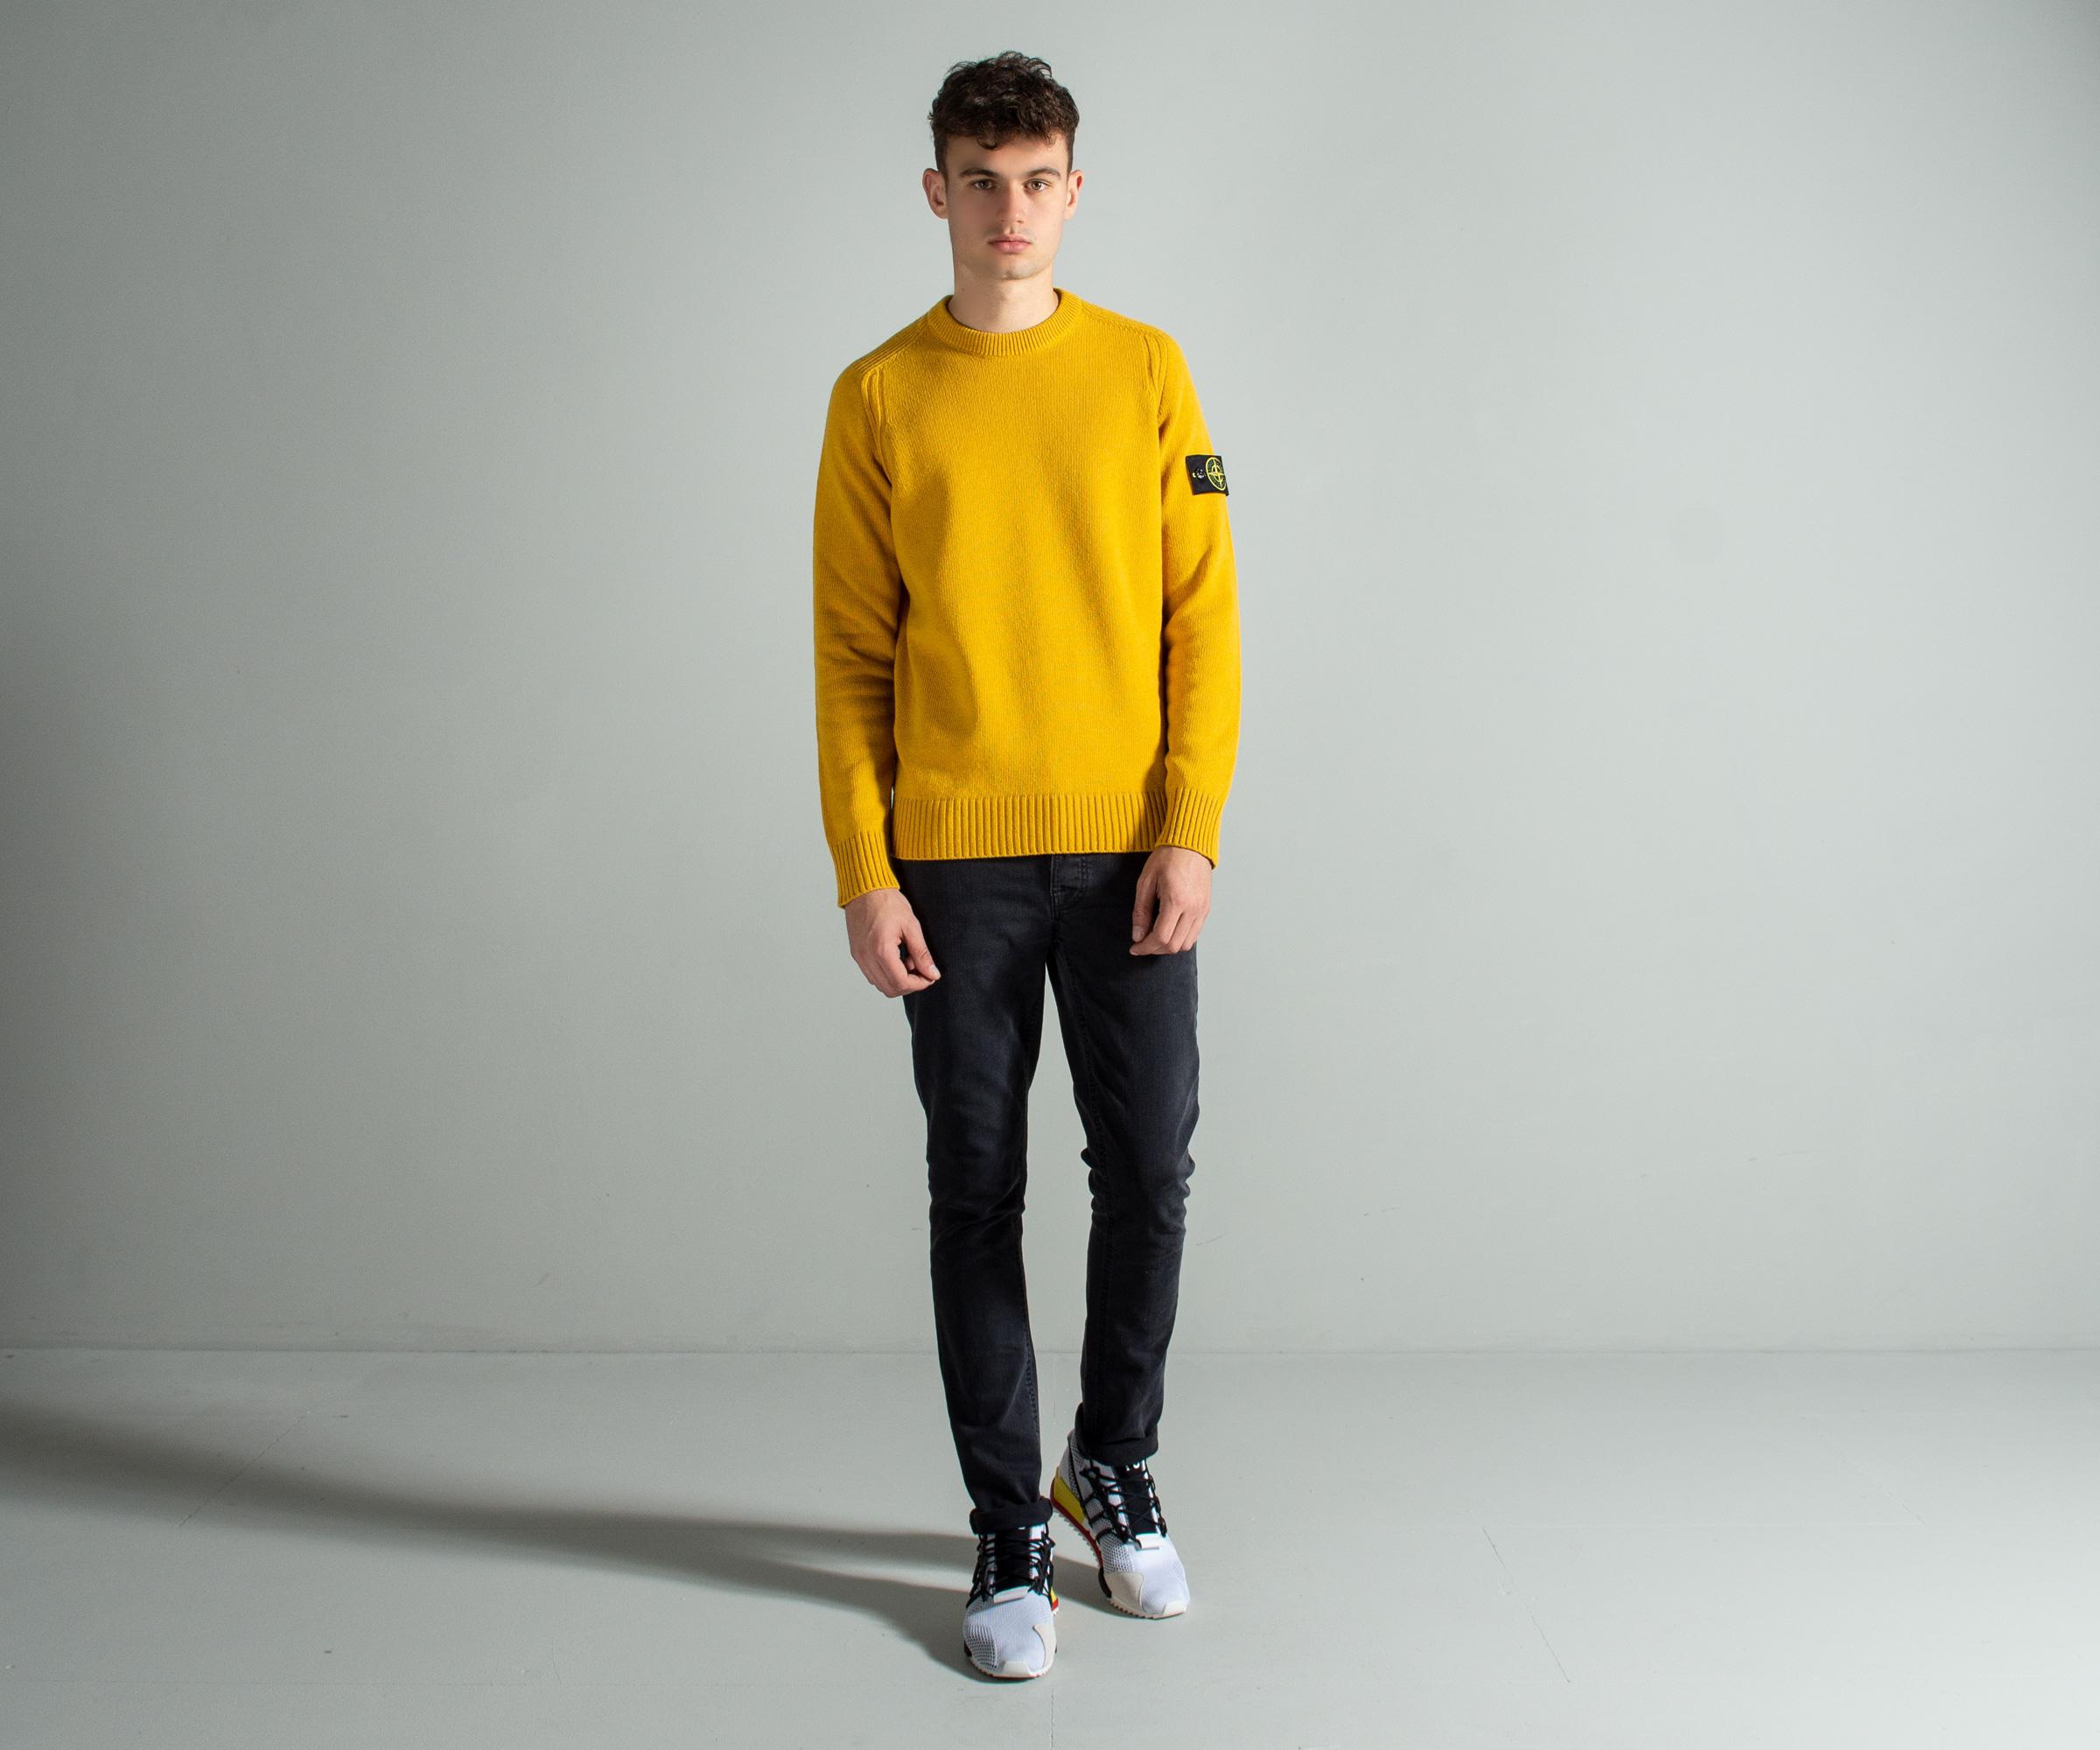 Stone Island Wool Crew Neck Knit Mustard in Yellow for Men - Lyst